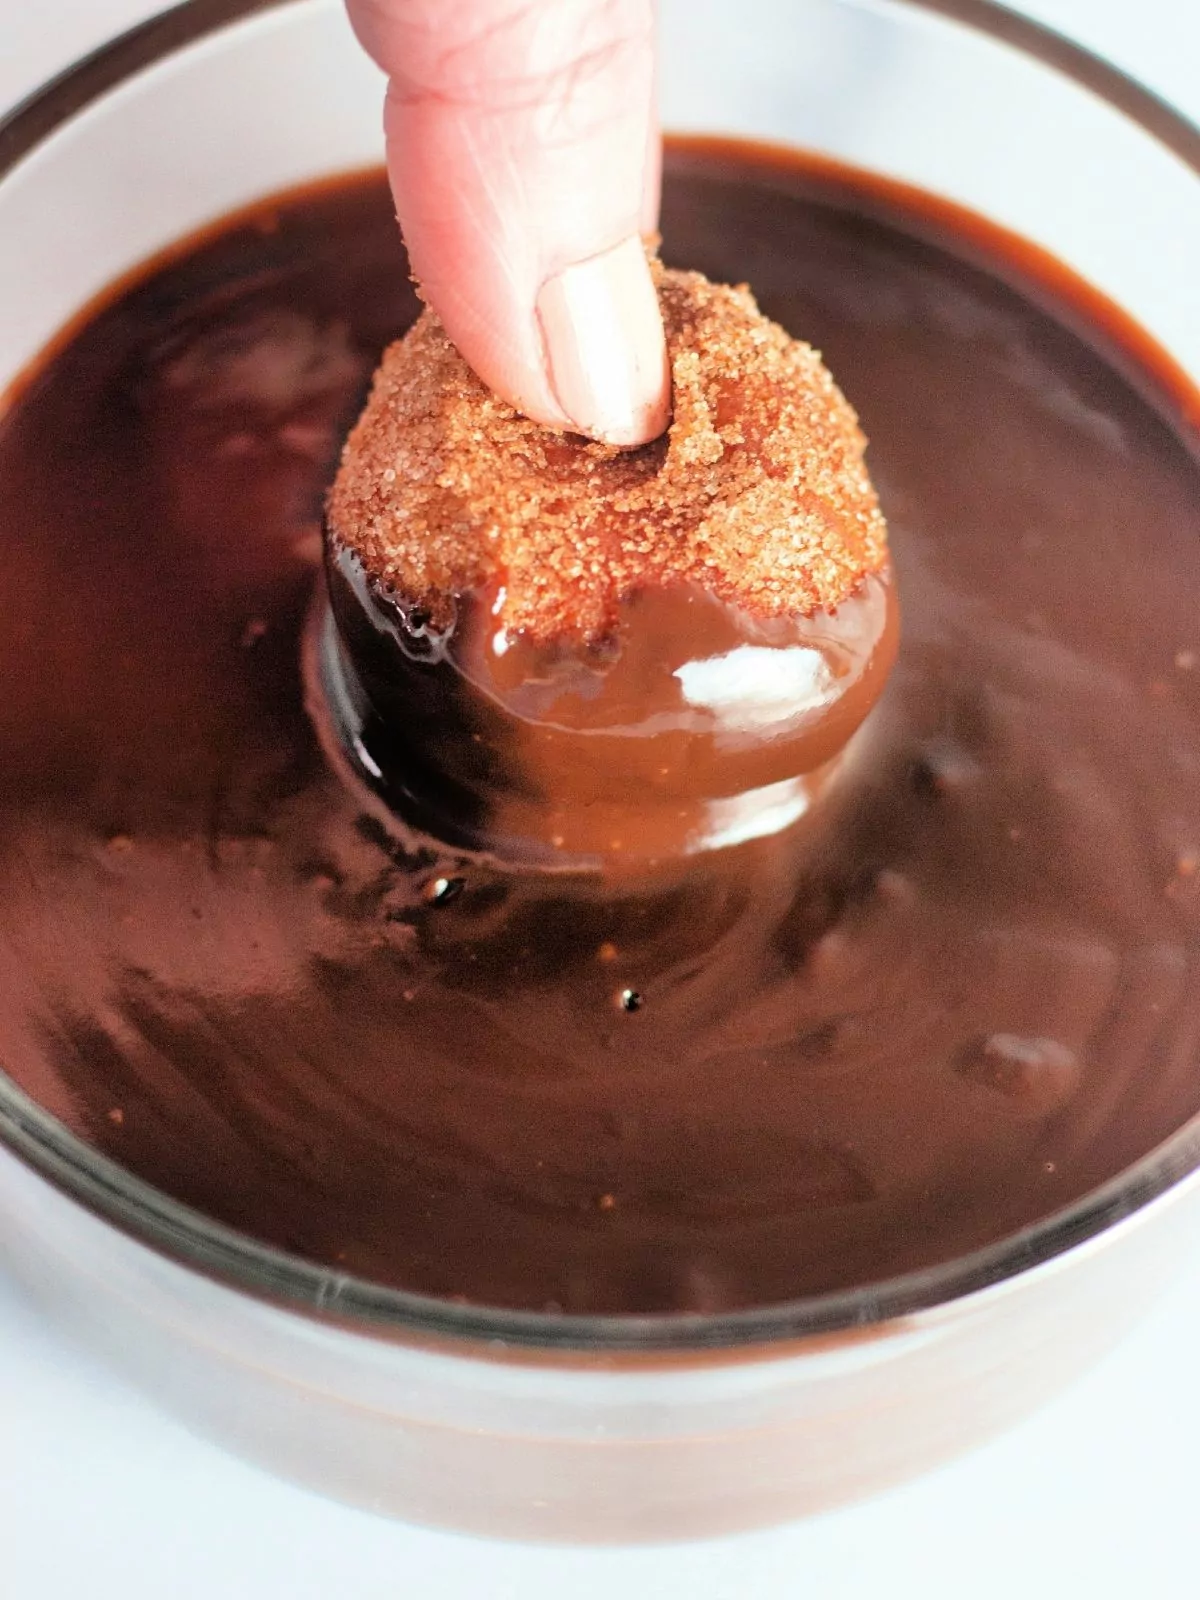 dipping donut hole in melted chocolate.